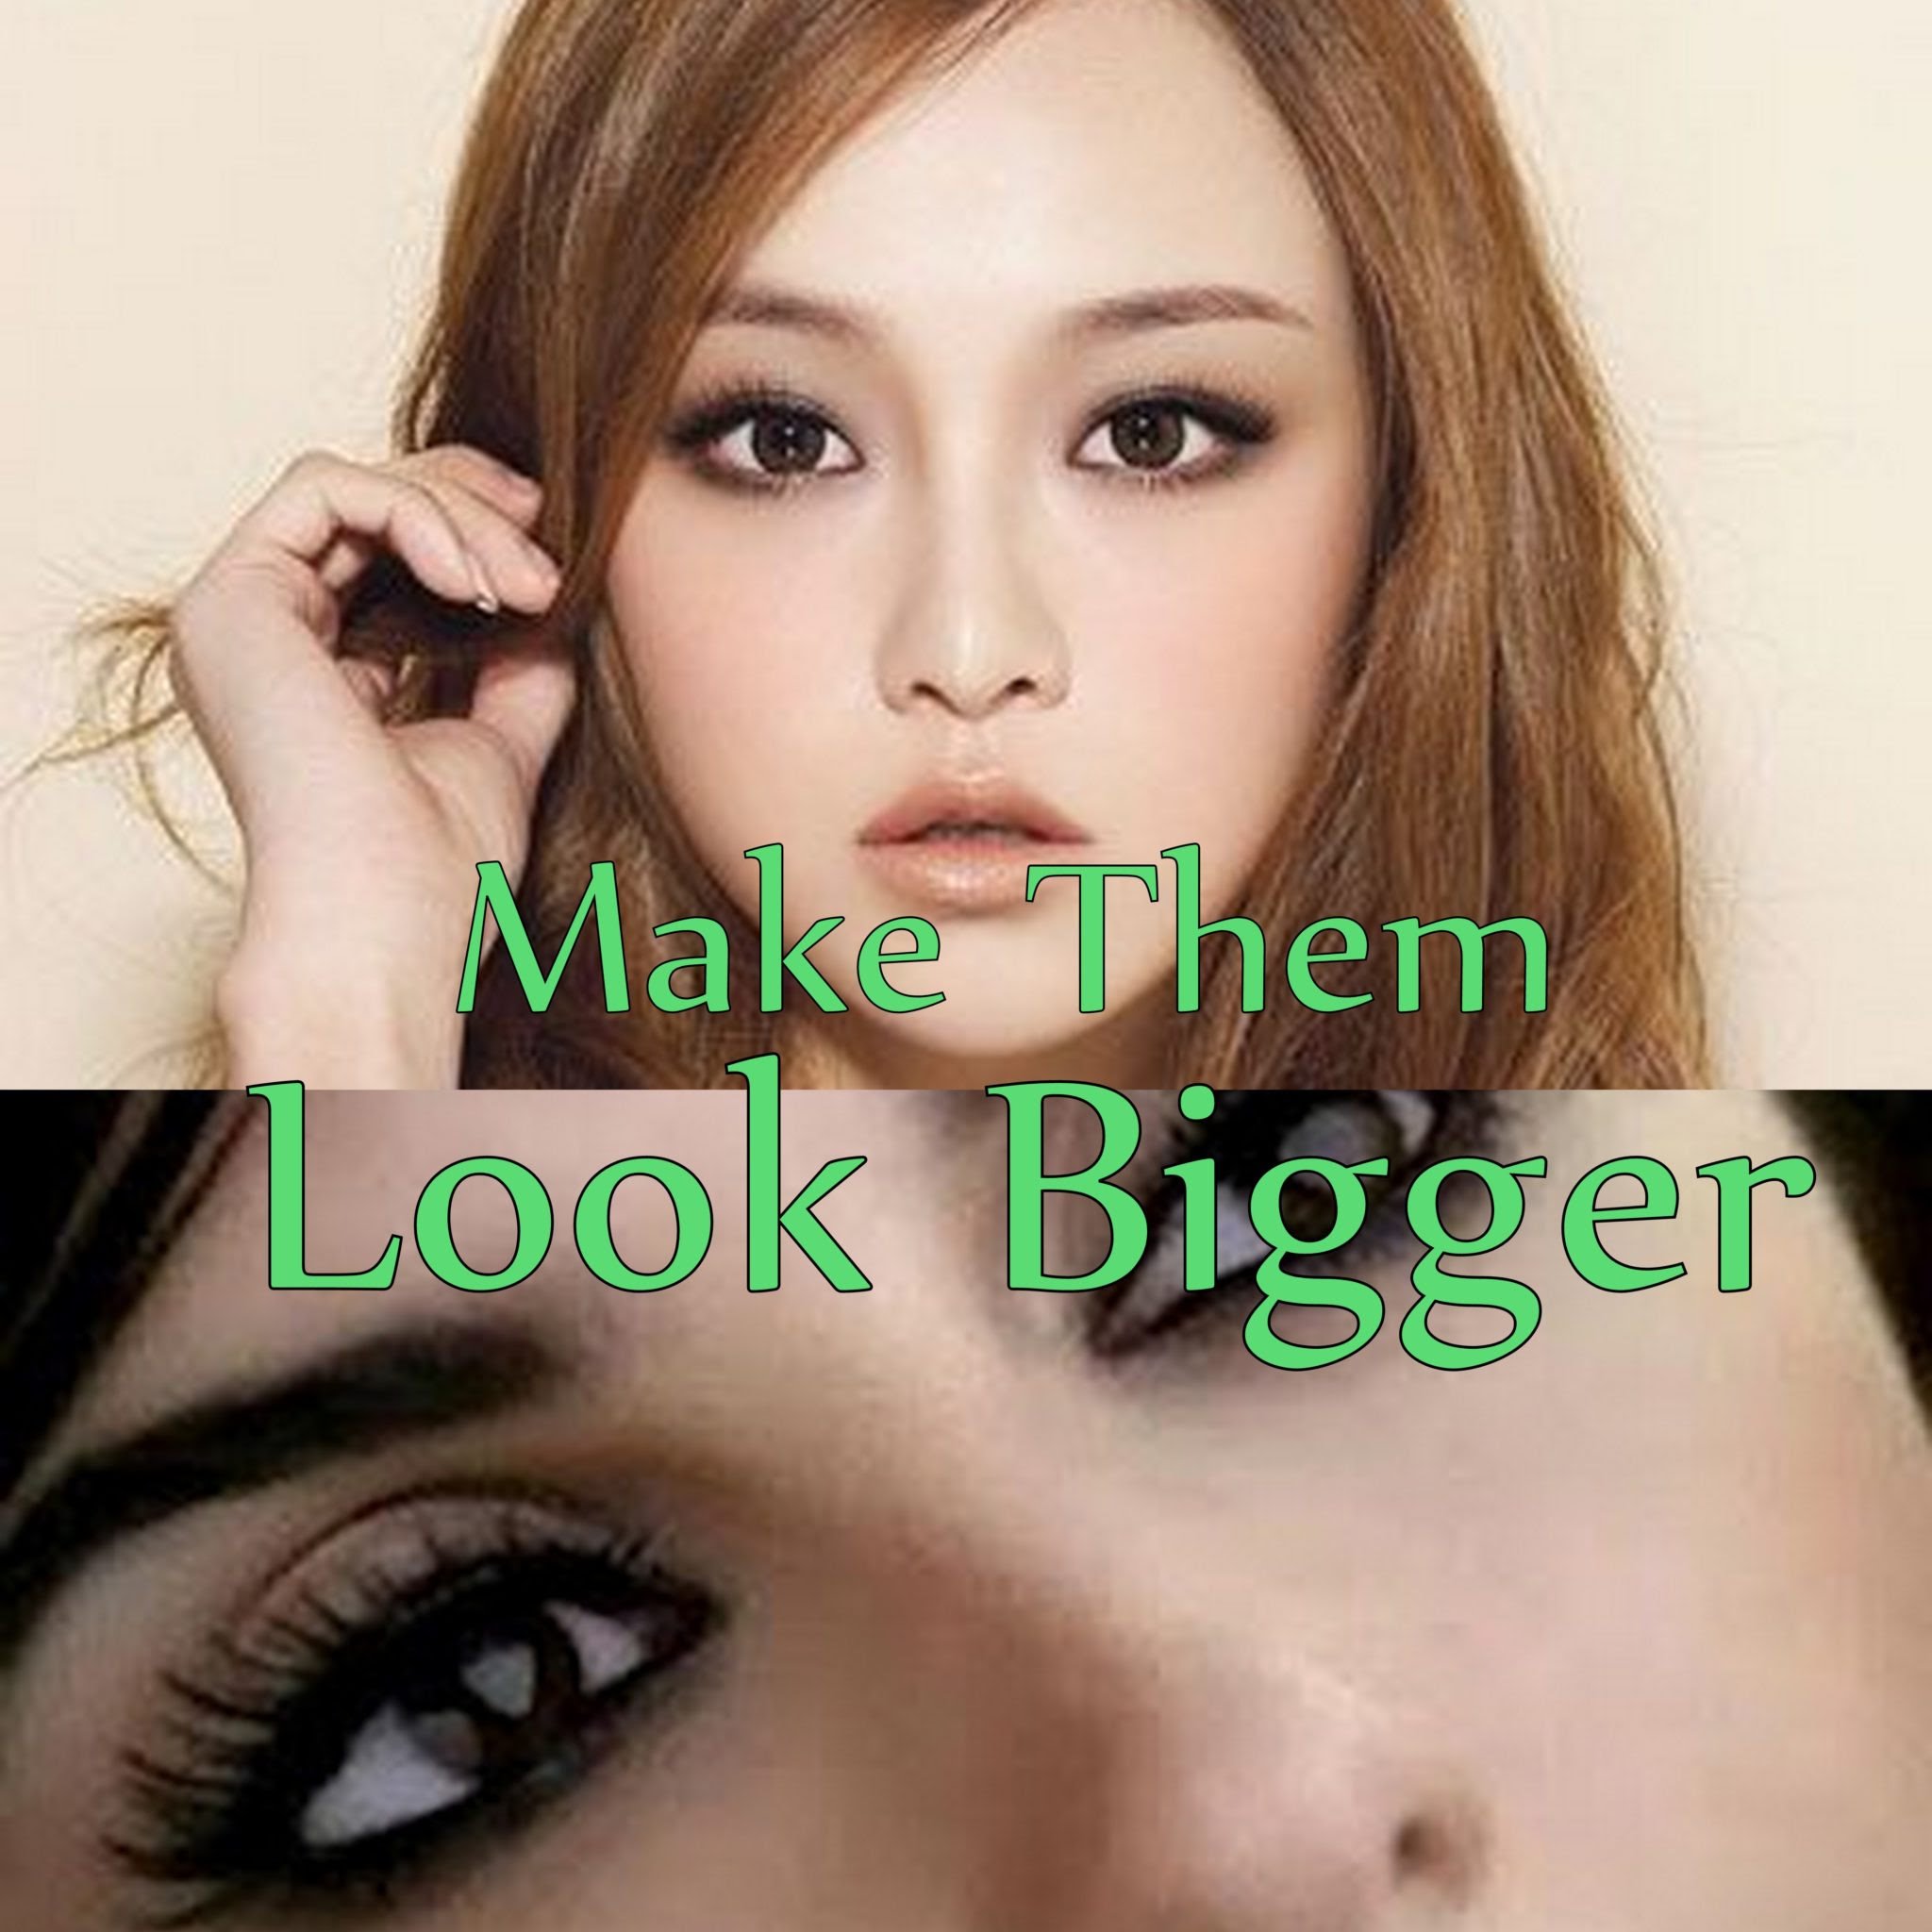 10 MAKEUP TIPS ON HOW TO MAKE YOUR EYES LOOK BIGGER